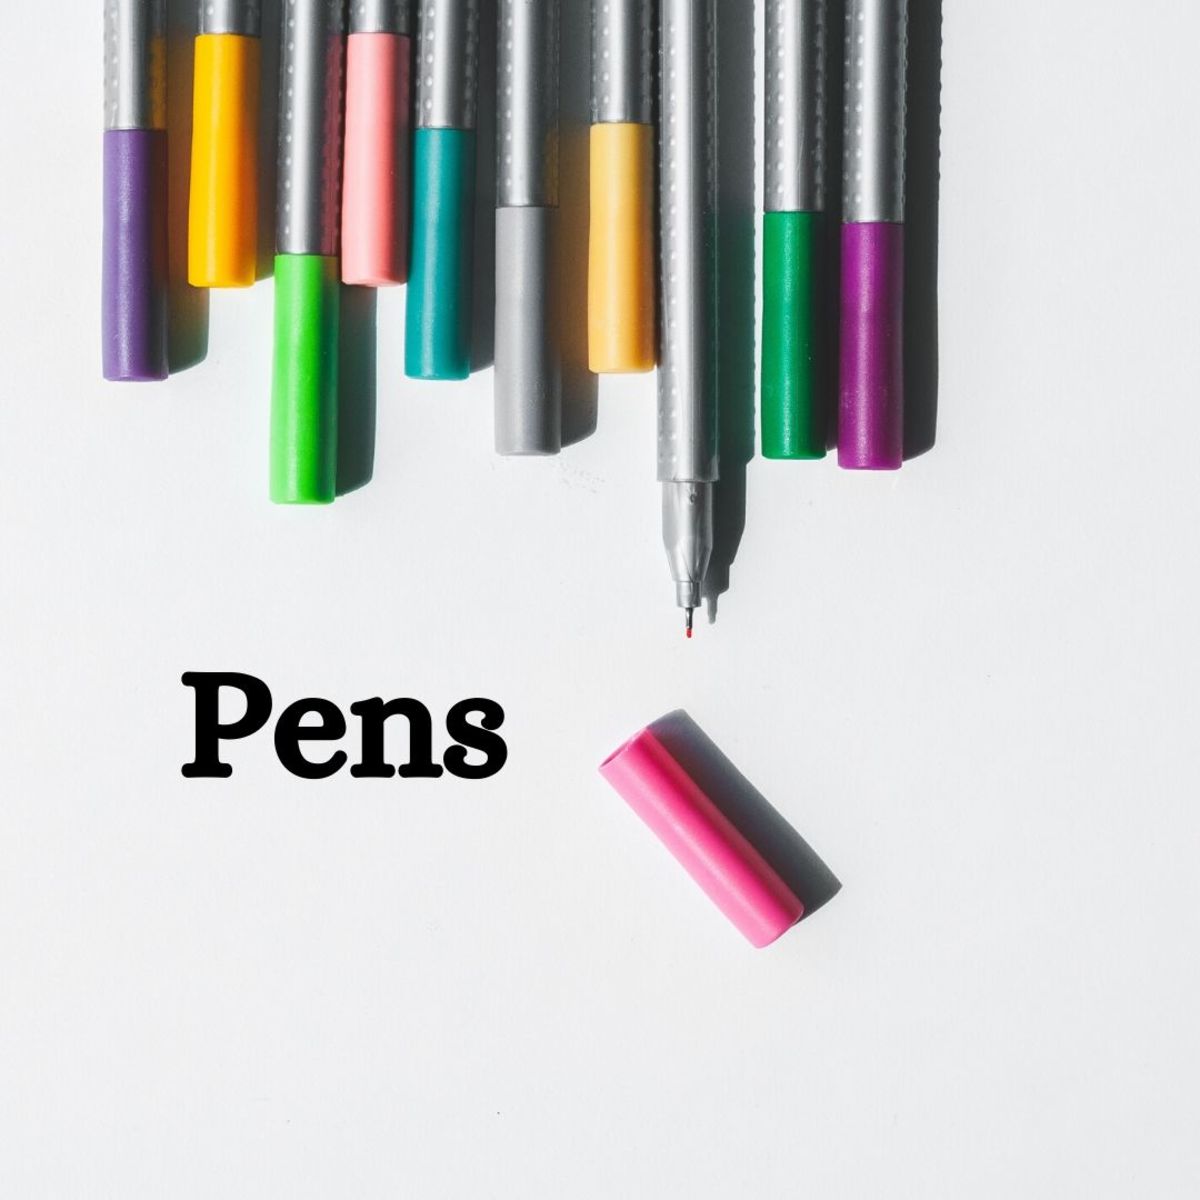 Pens—ballpoint, gel, fountain—whatever your style, find the type of pen that's right for you, and start collecting now!